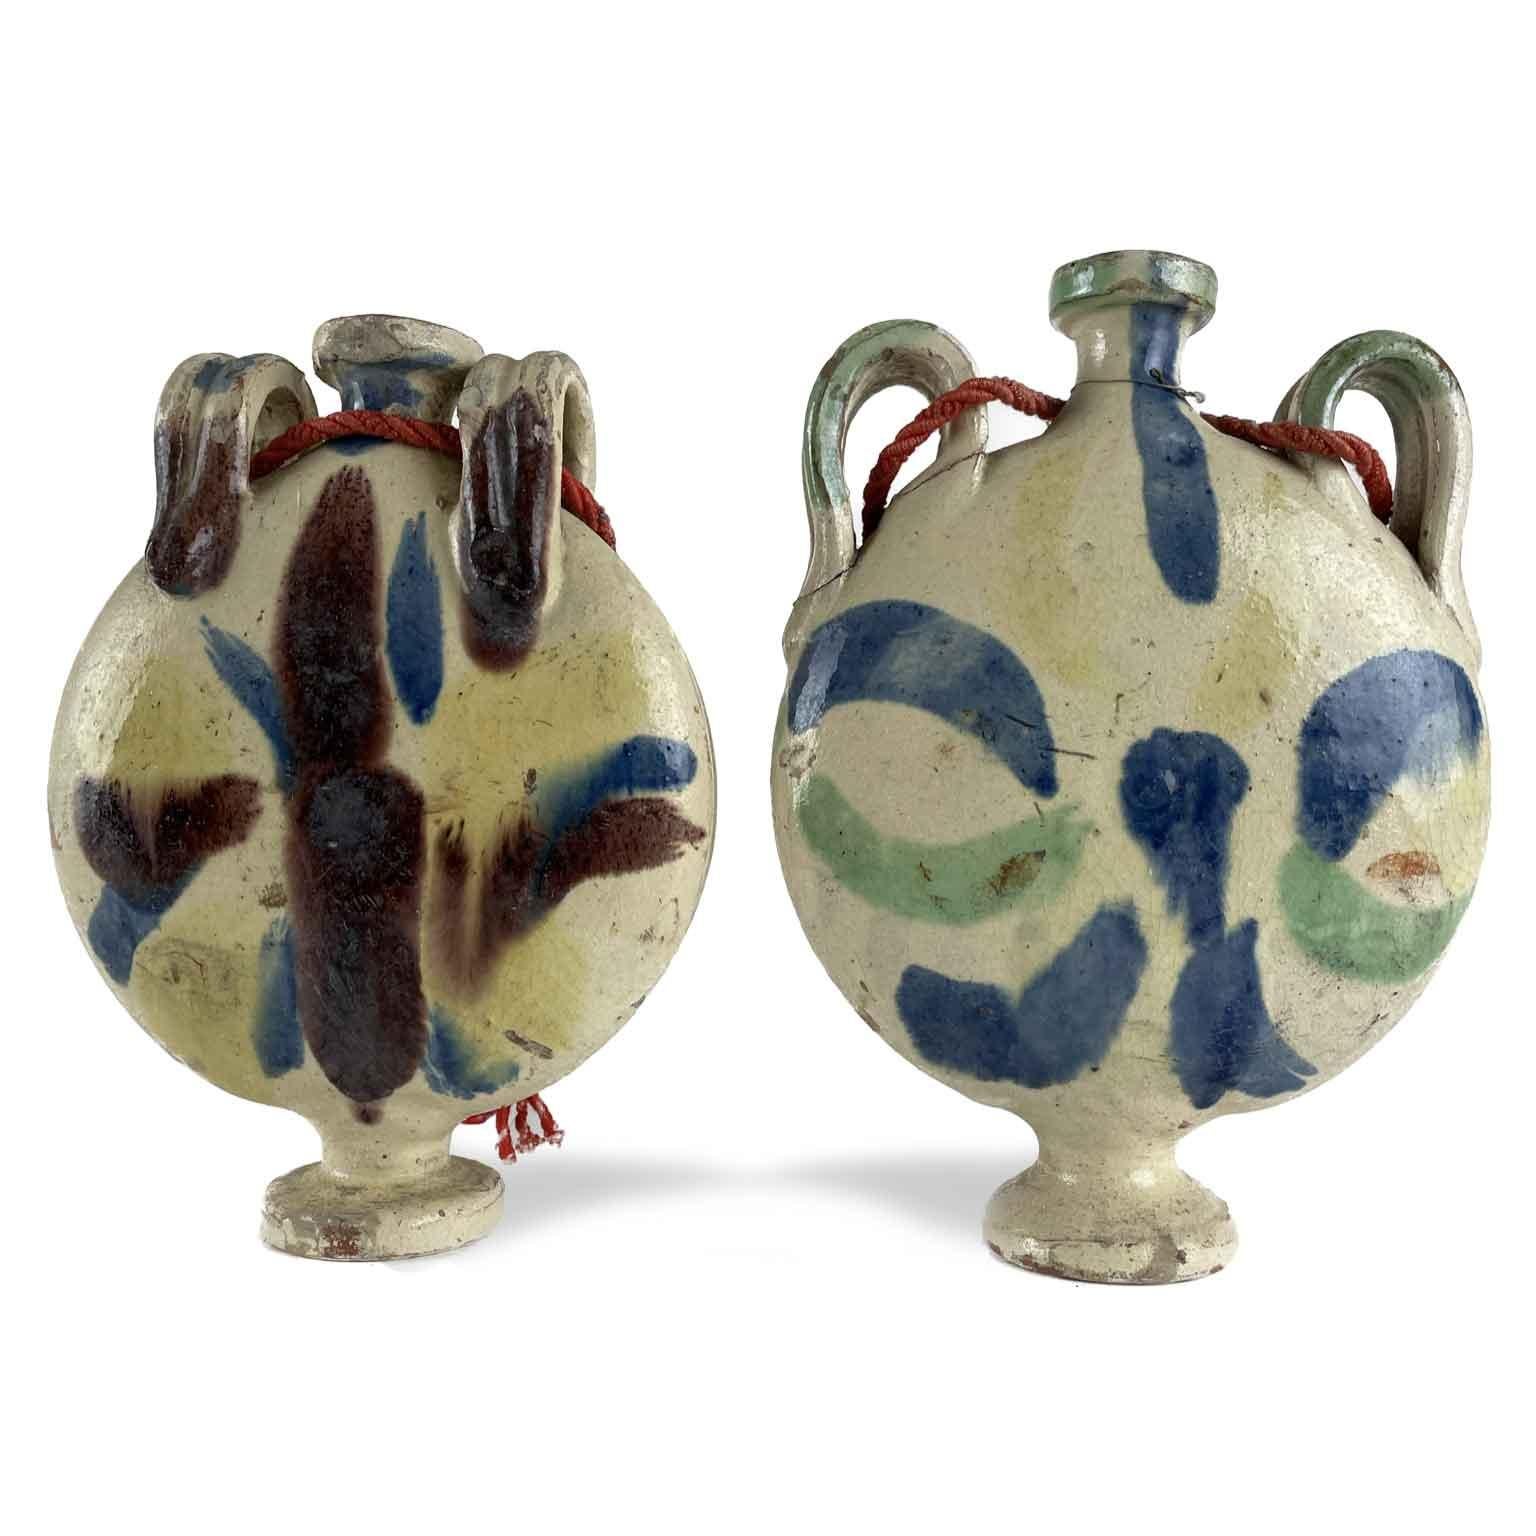 Italian Faience Bottles Two 19th Century Pilgrim Flasks Blue Decor Almost a Pair For Sale 2